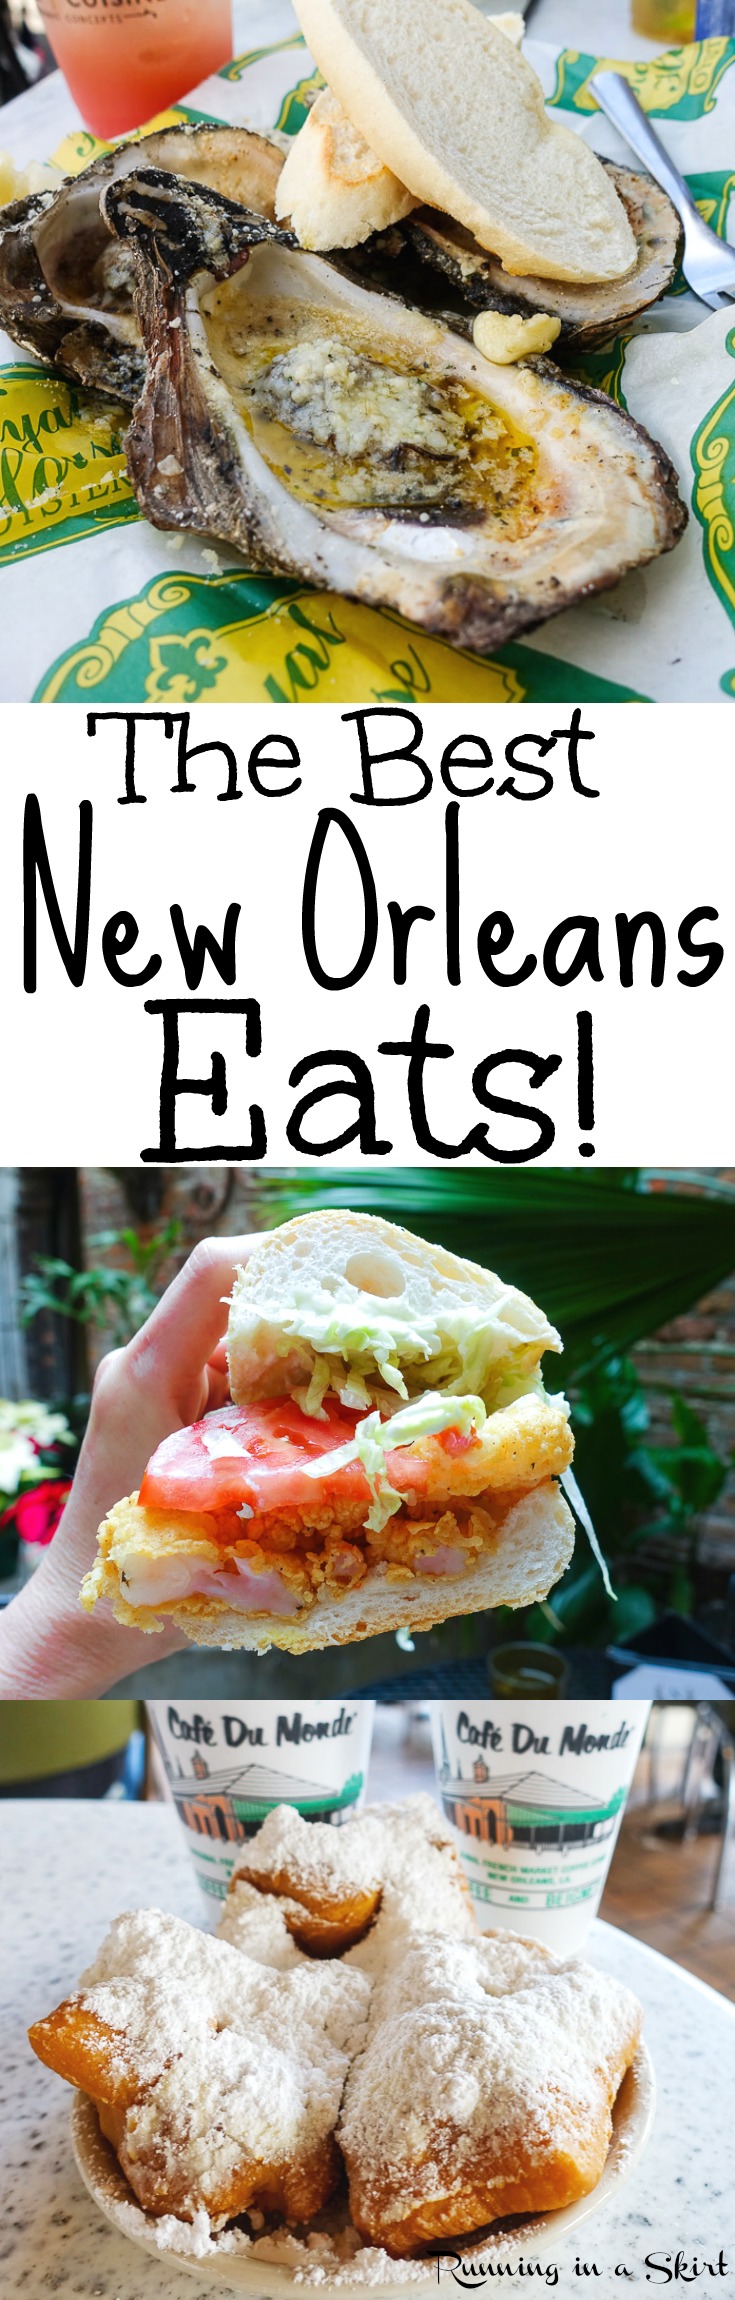 The Best New Orleans Eats & Drinks - A travel guide for the best NOLA restaurants including Cafe du Monde, beignets, po'boys, oysters, gumbo, red beans.  This is the food you have to try in Louisiana... including lots of seafood! A bucket list of places to try in the French Quarter and beyond... including breakfast, lunch and dinner./ Running in a Skirt via @juliewunder